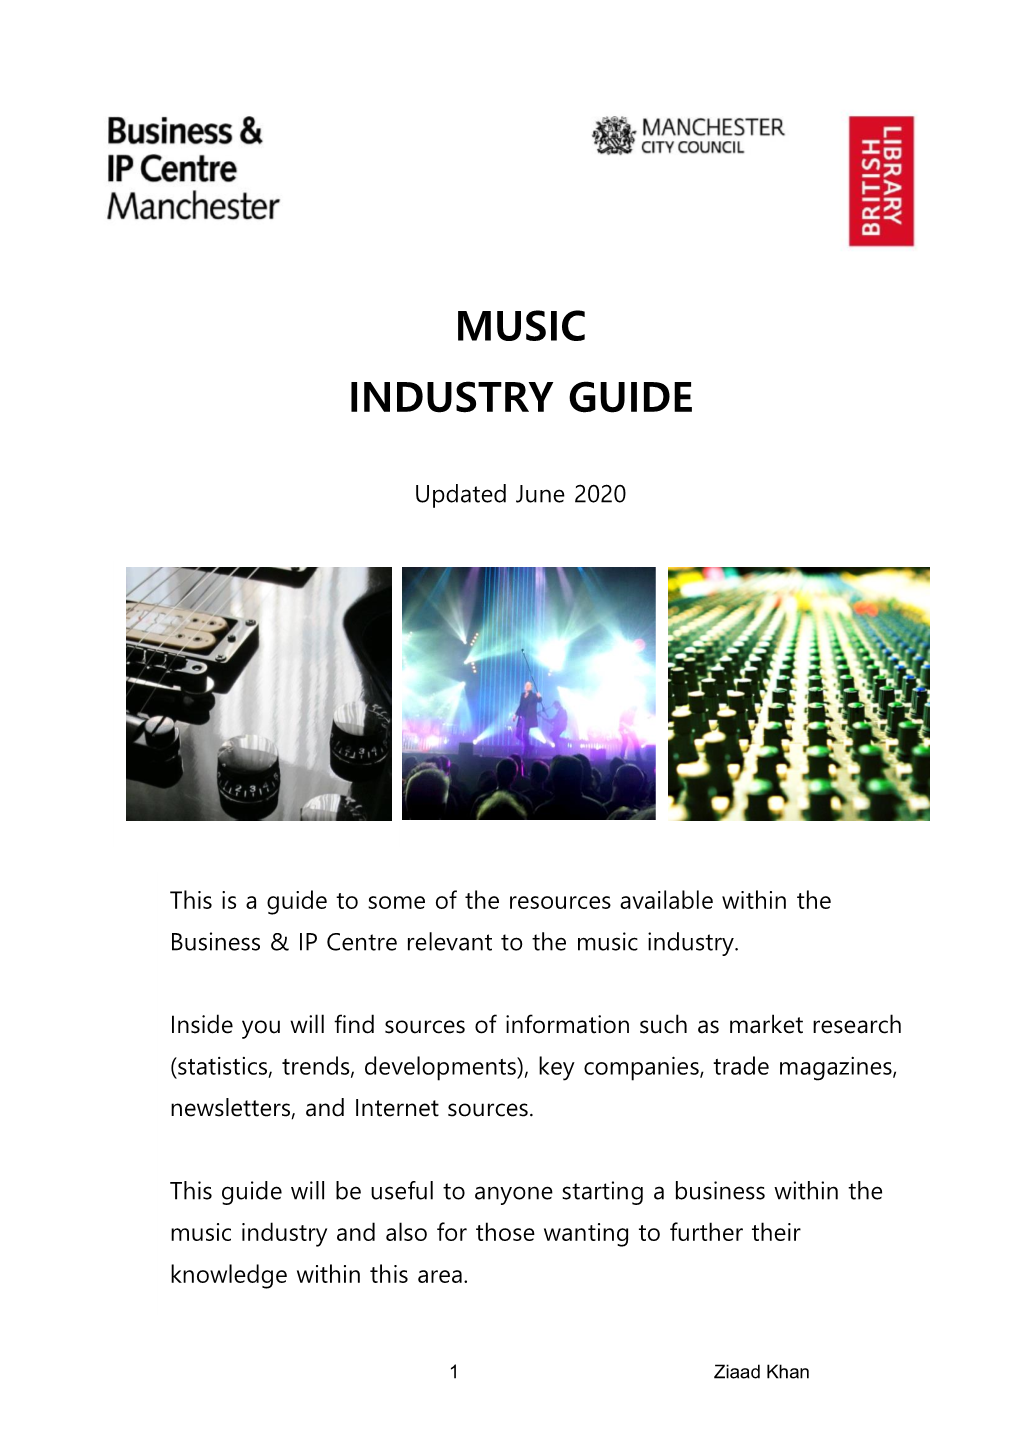 Music Industry Guide